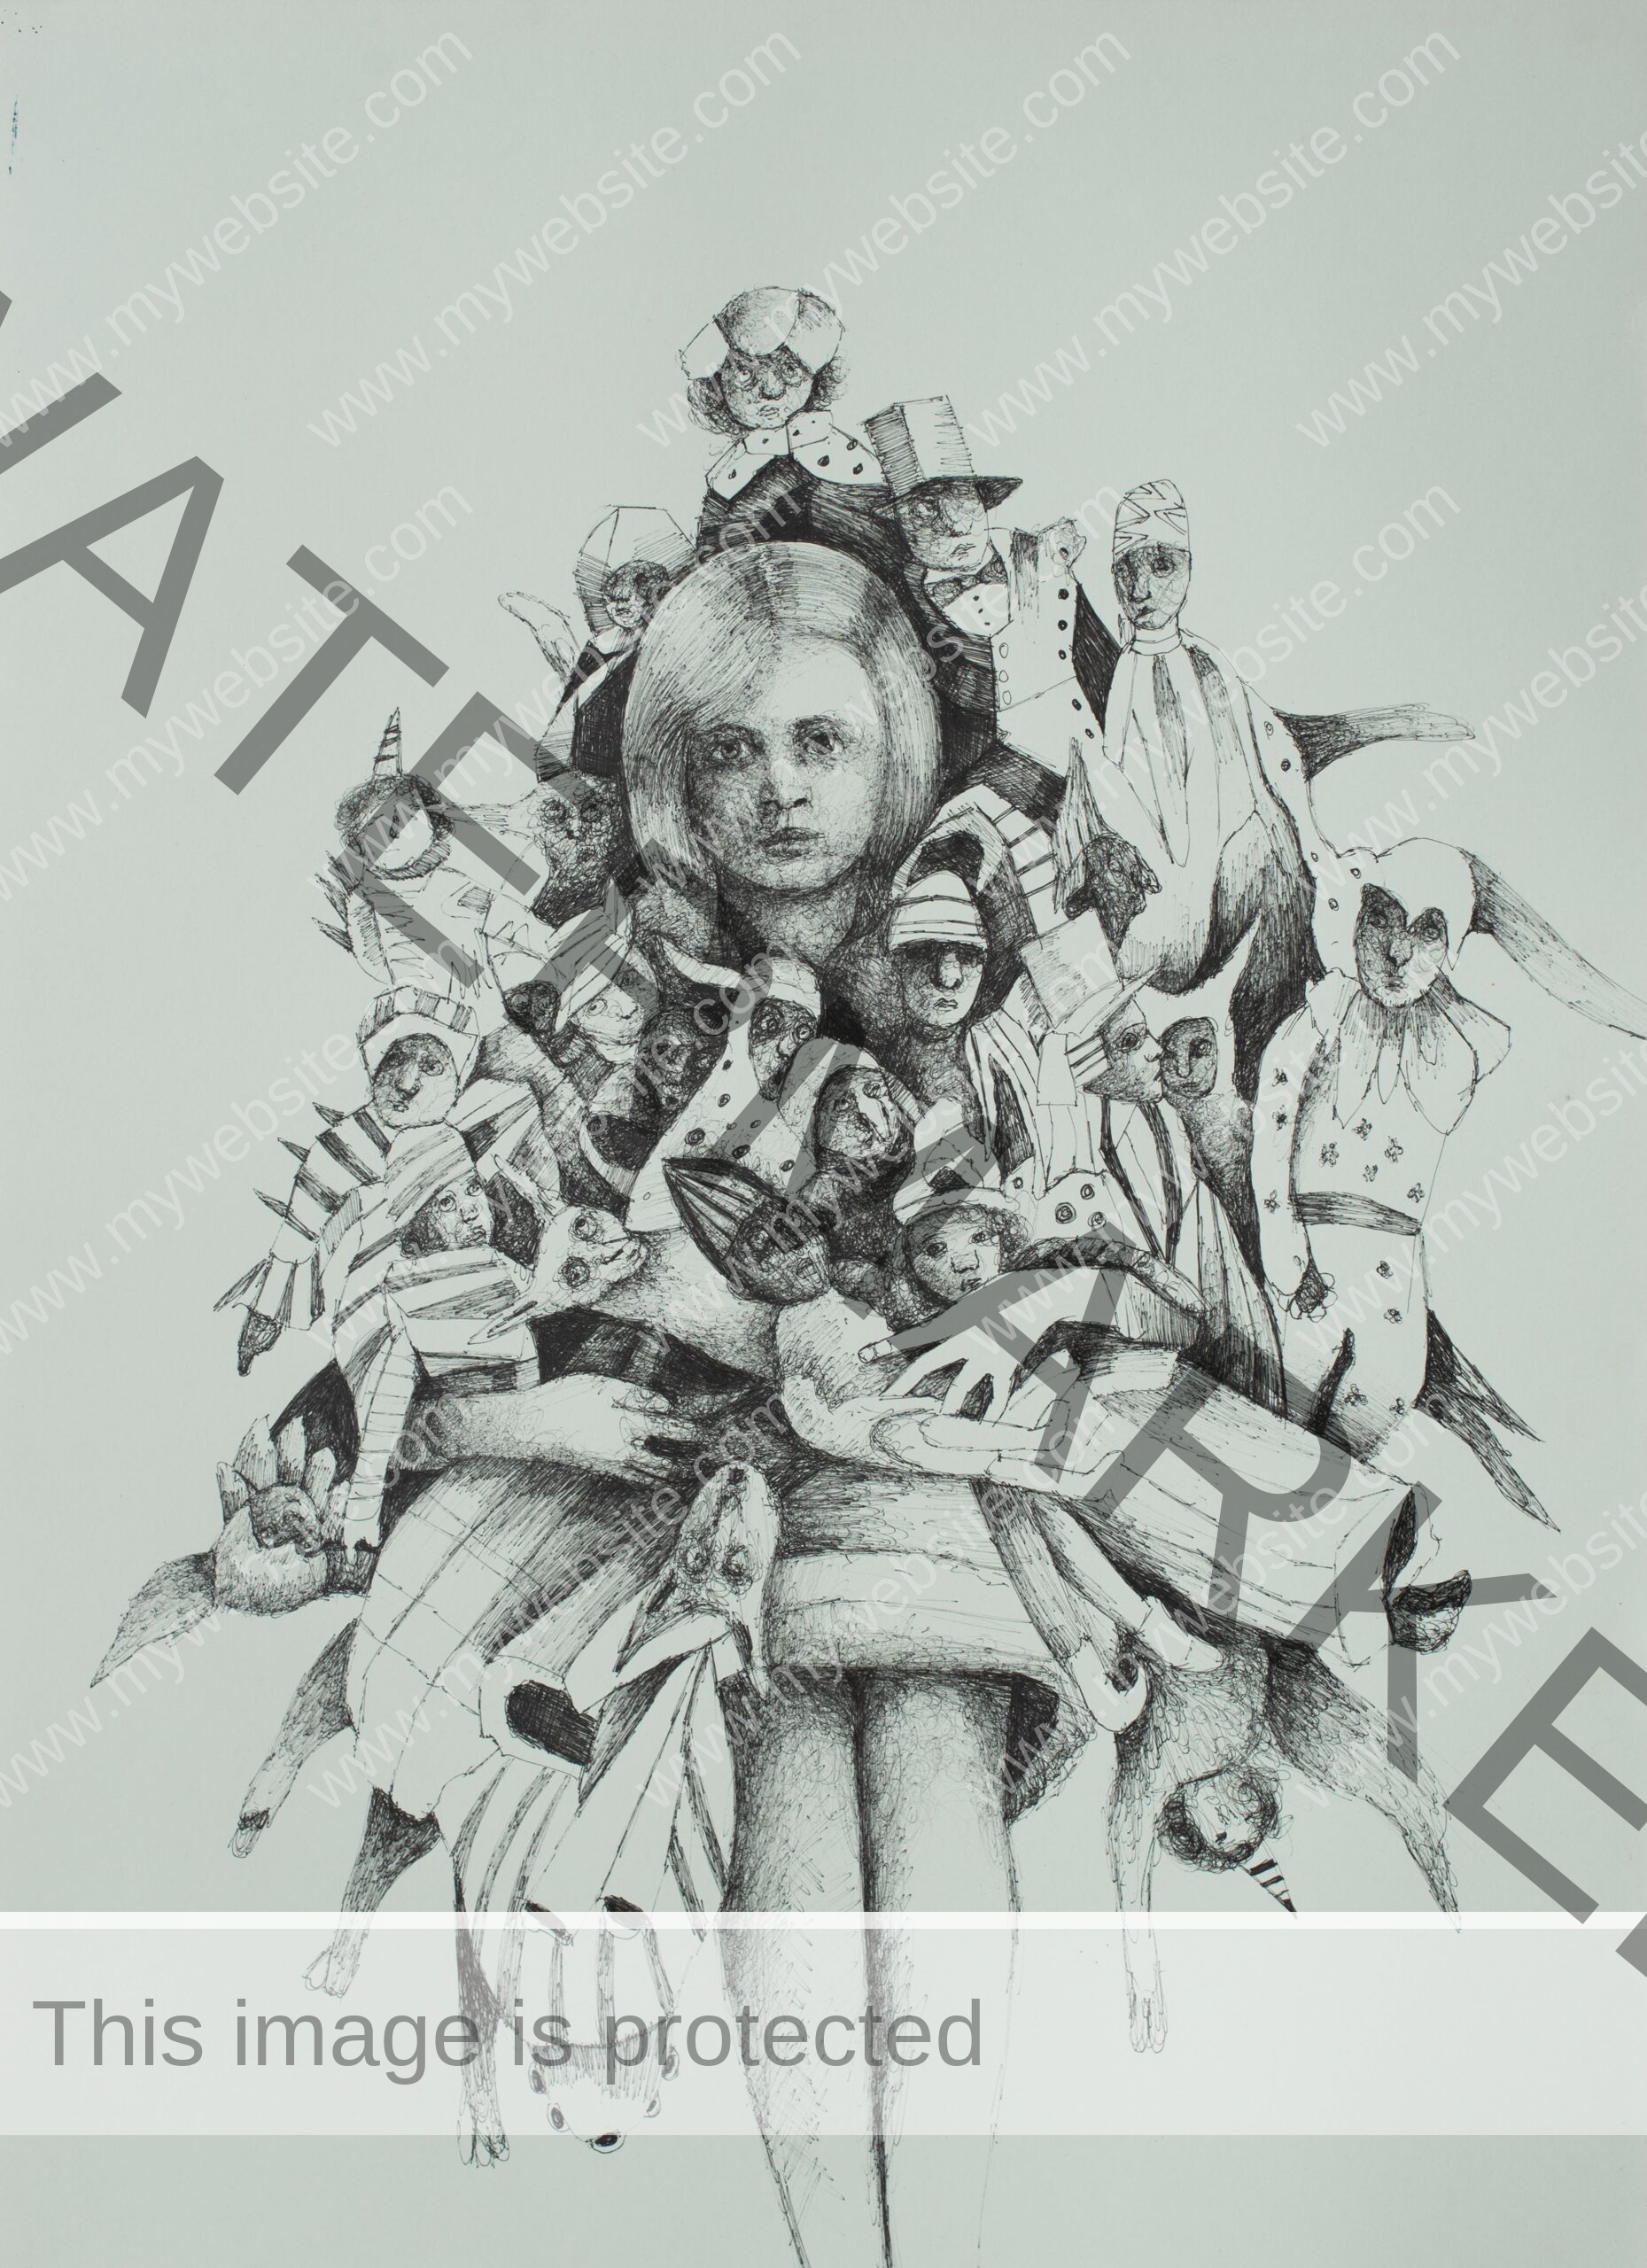 Puppeteer ink on paper by Pablo Mejias, featuring a young girl holding a myriad of puppets in her arms.